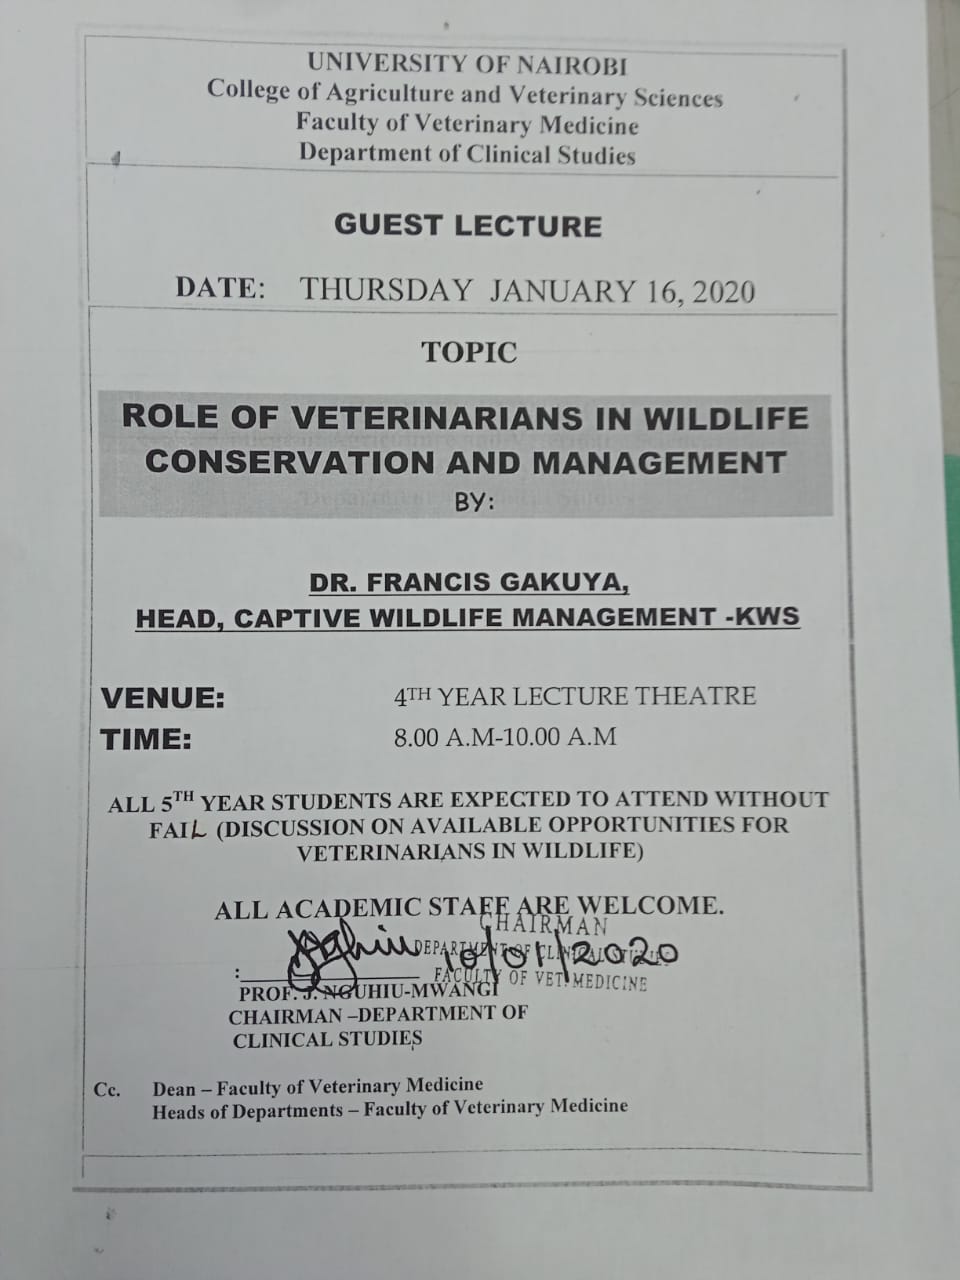 Guest lecture on the role of veterinarians in wildlife conservation and management